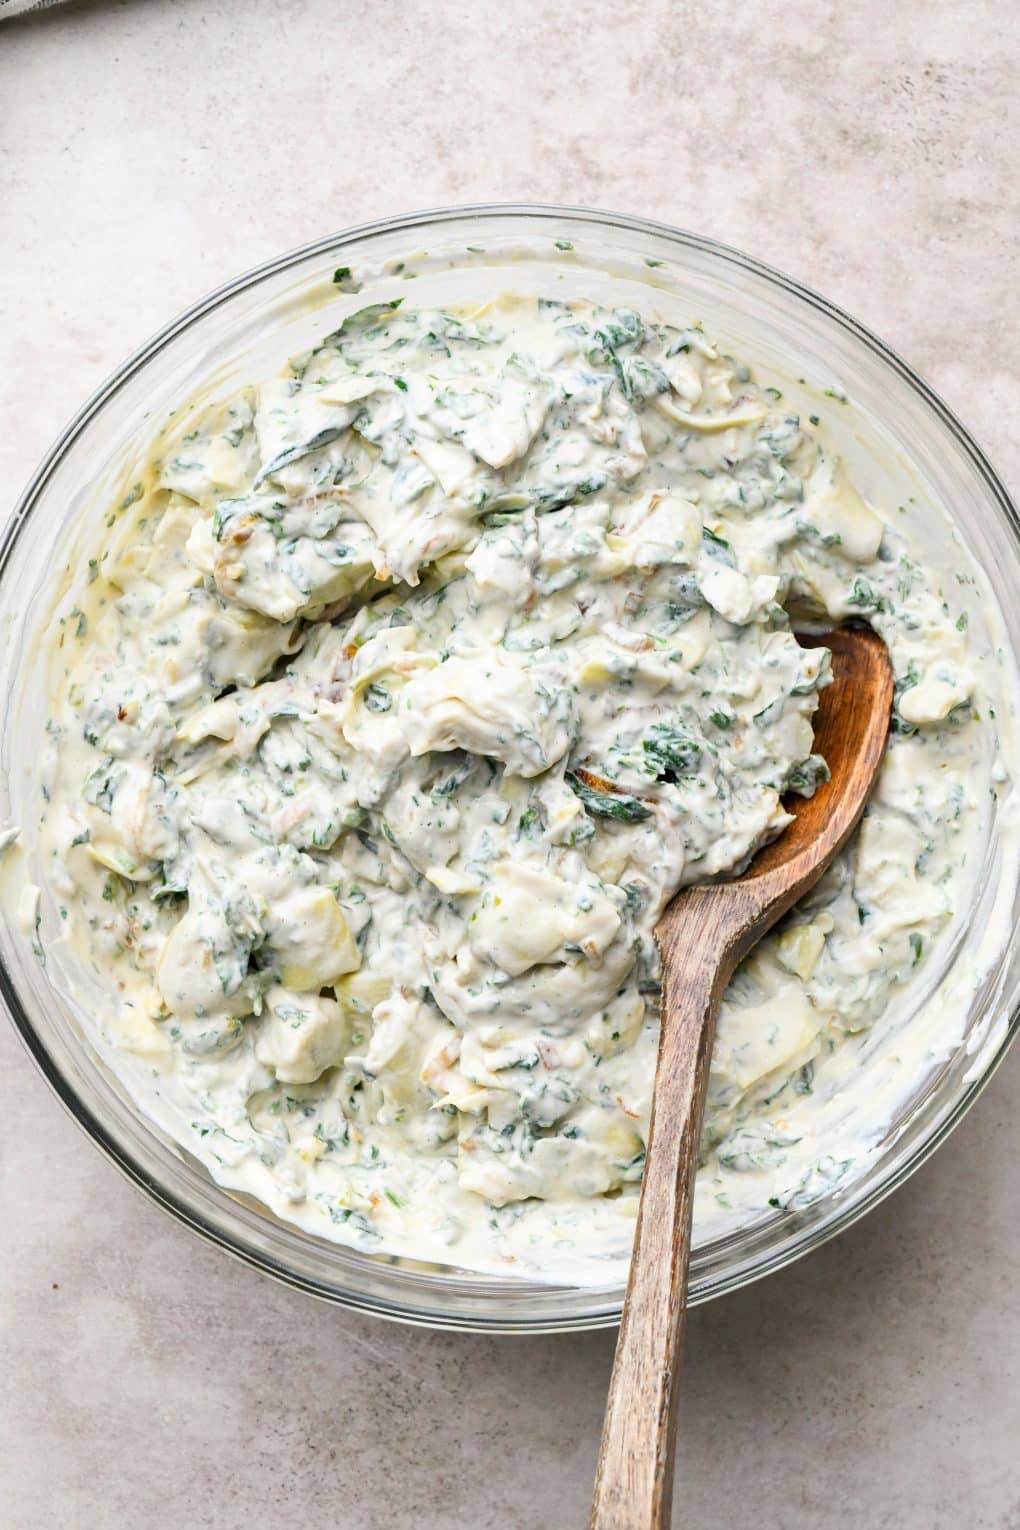 How to make Dairy Free Spinach Artichoke Dip: All dip ingredients mixed together in a glass bowl.